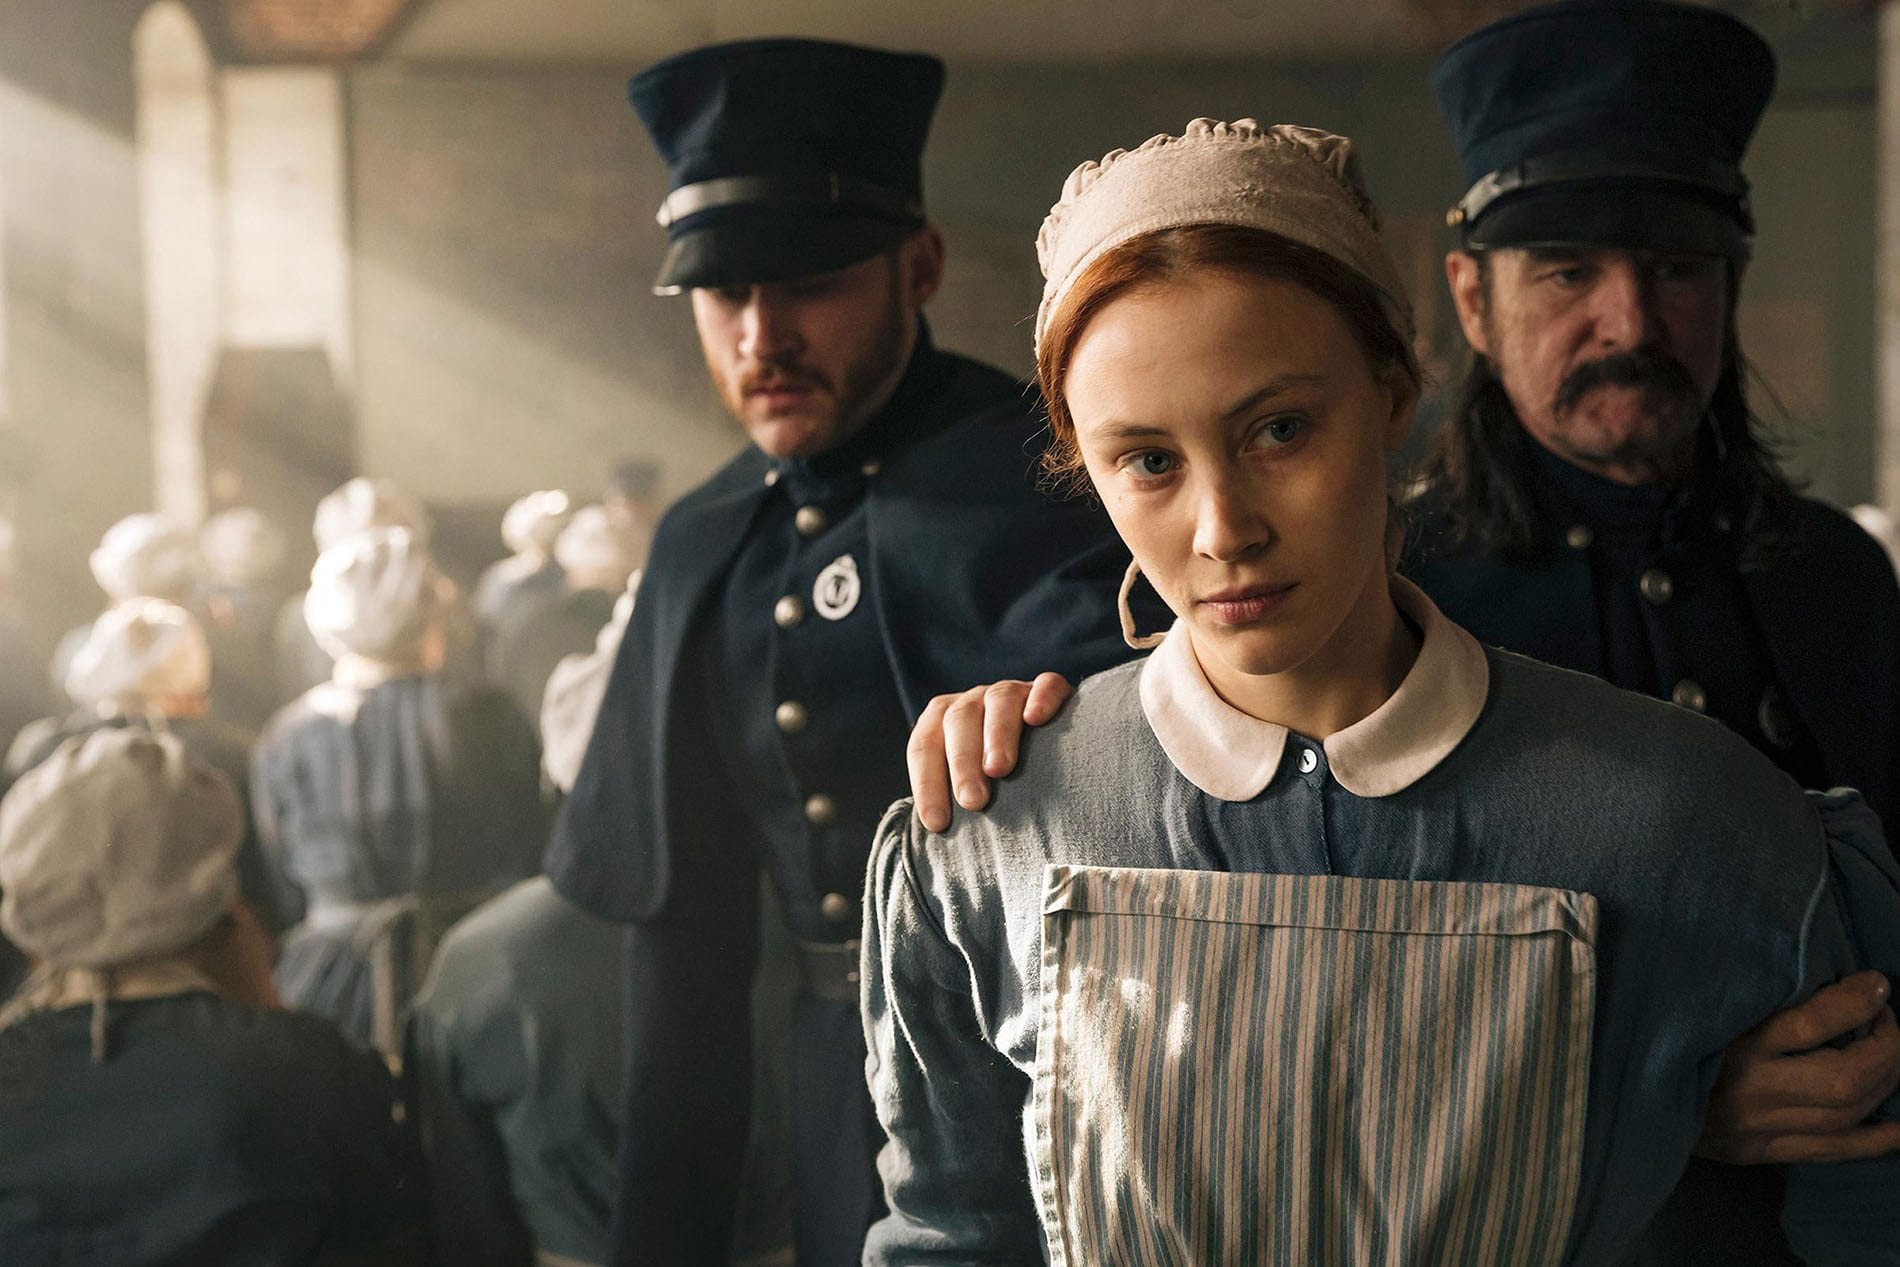 Hulu’s 'The Handmaid’s Tale' ensured that more Margaret Atwood adaptations would follow, and Netflix is quick out of the gate with 'Alias Grace'.